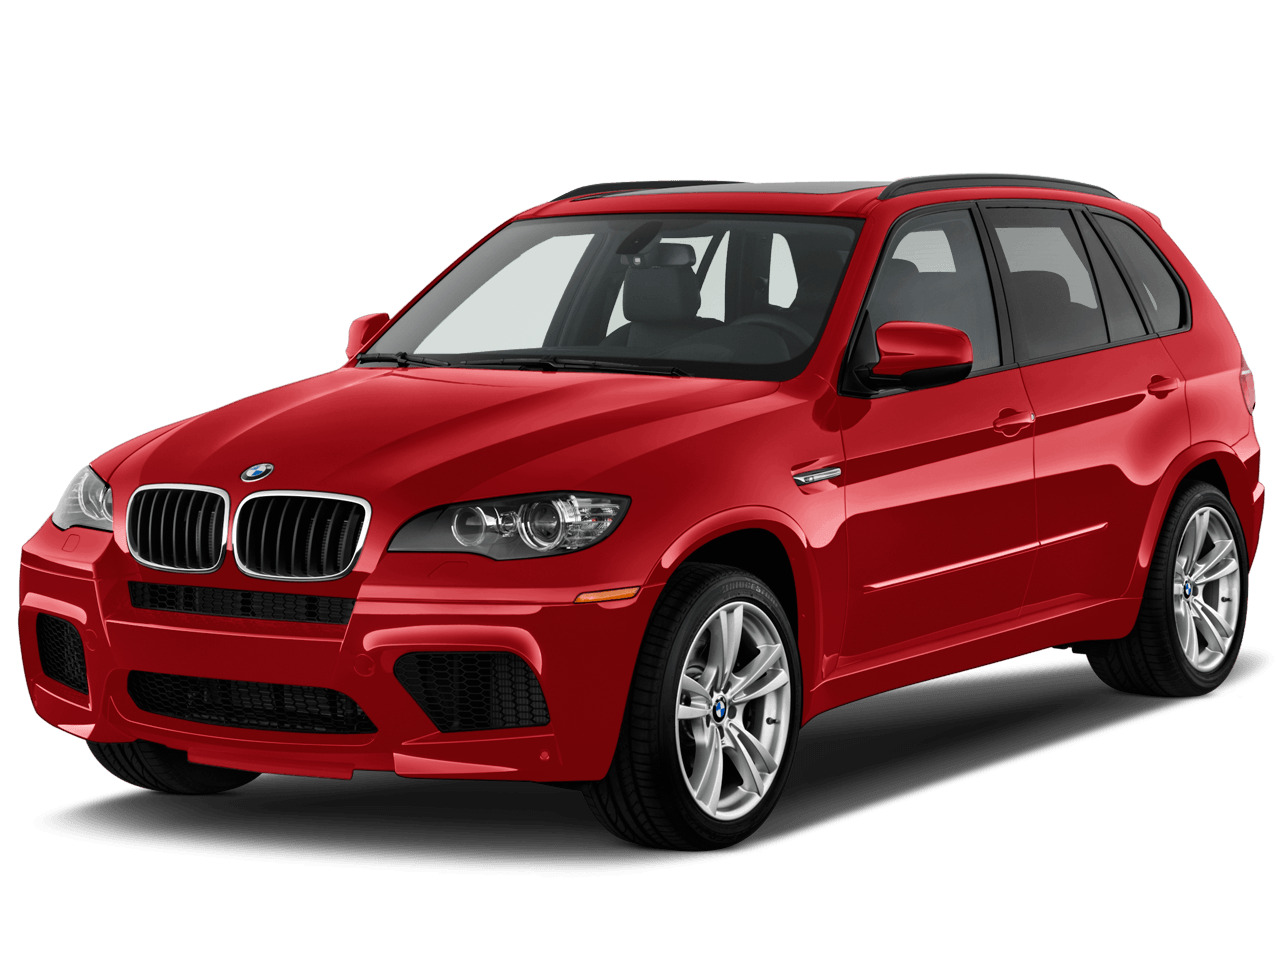 Red Bmw X5 icons